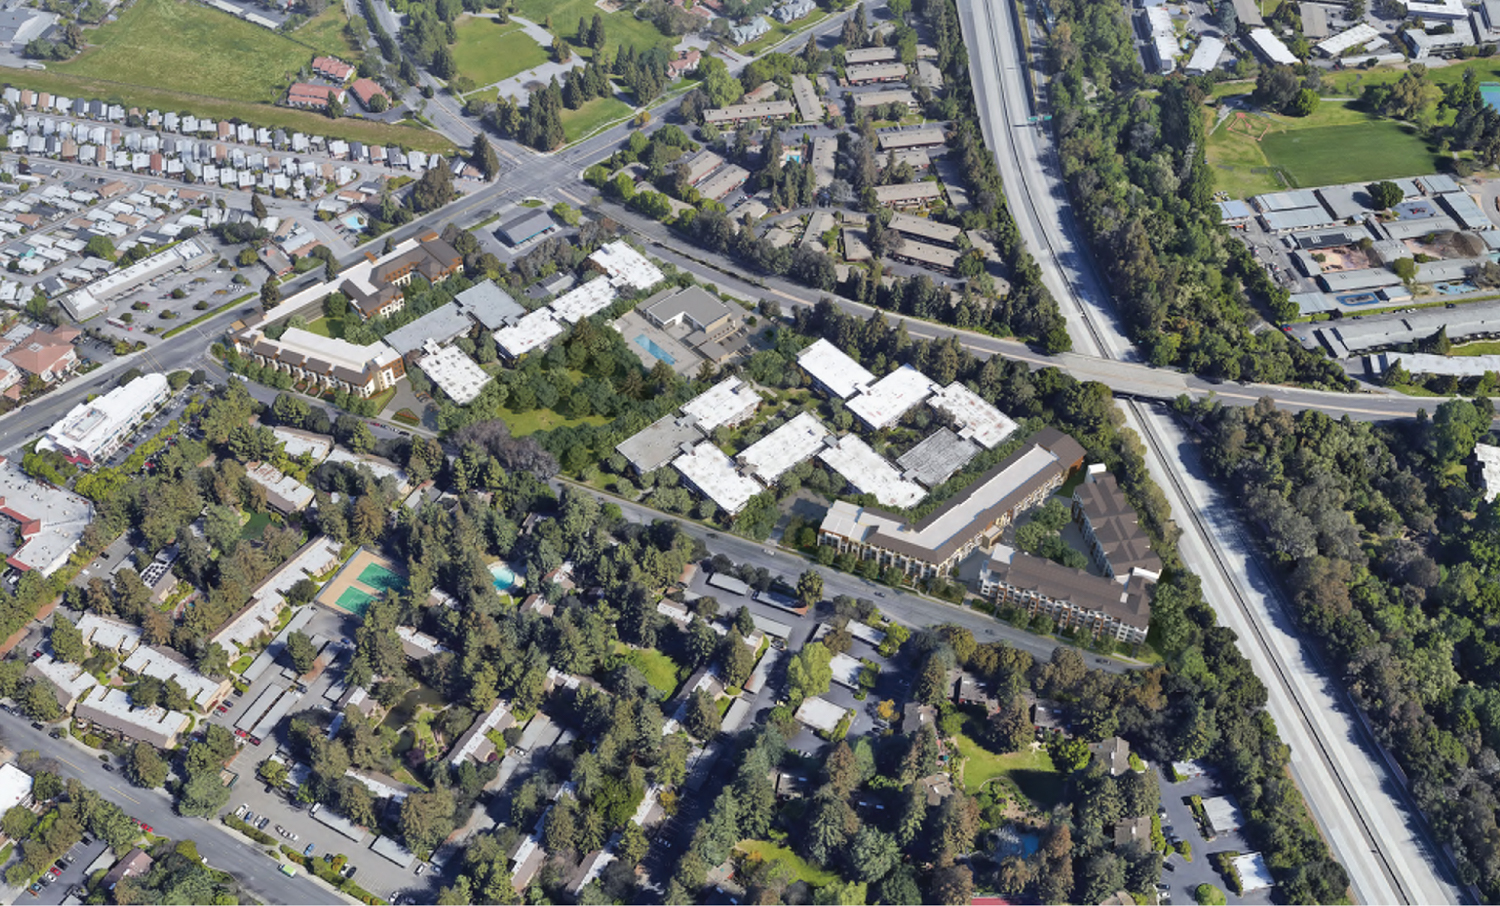 555 West Middlefield Road aerial overview with new buildings beside existing structures, rendering by BDE Architecture